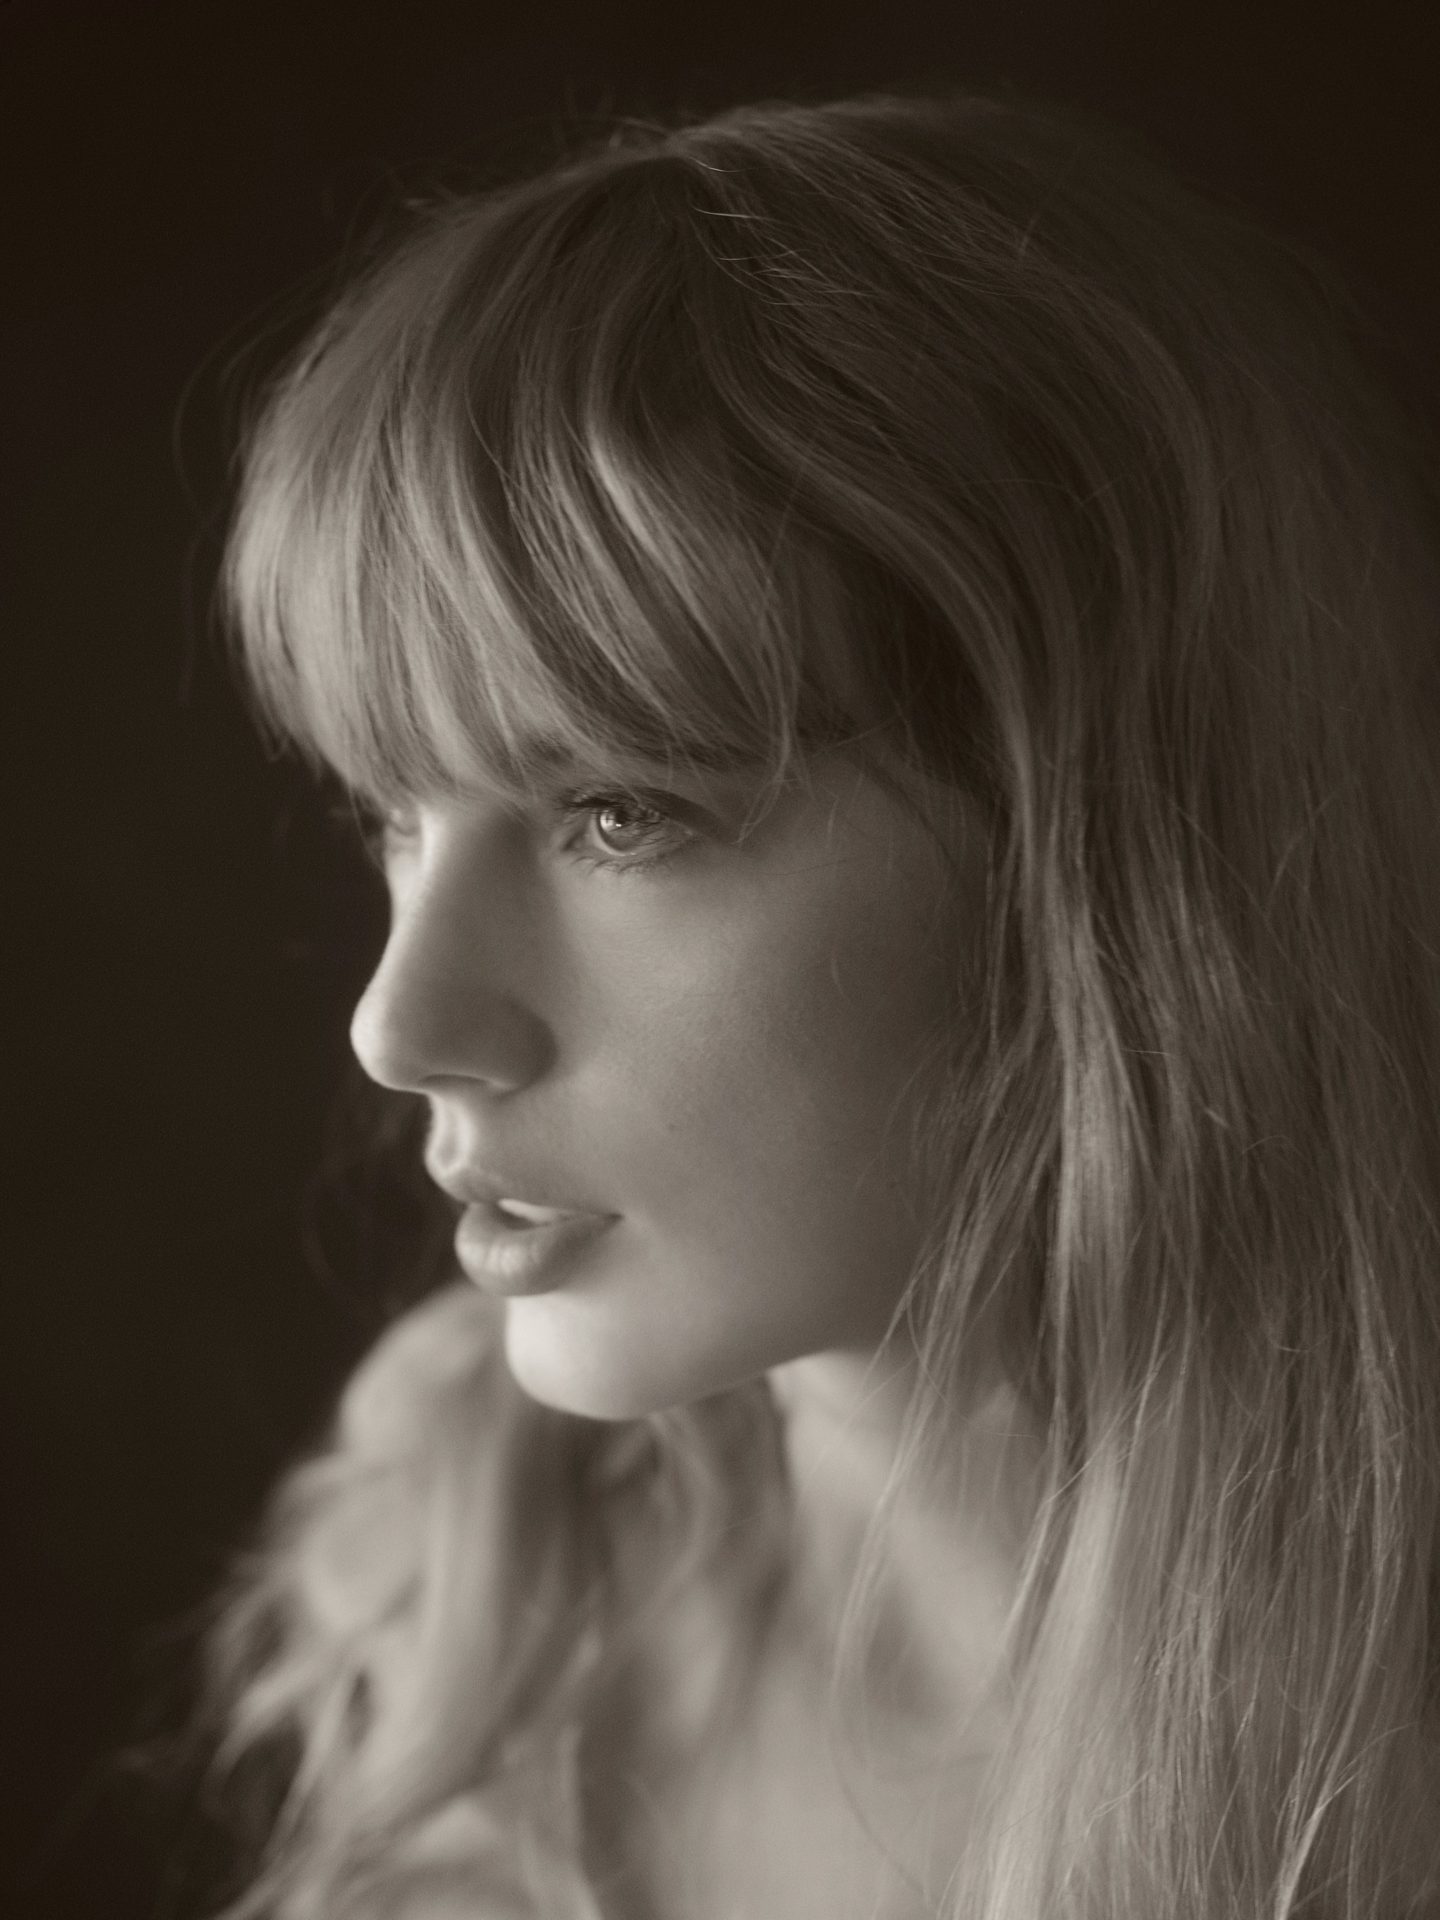 Taylor Swift poses for a shoot on her new album, The Tortured Poets Department